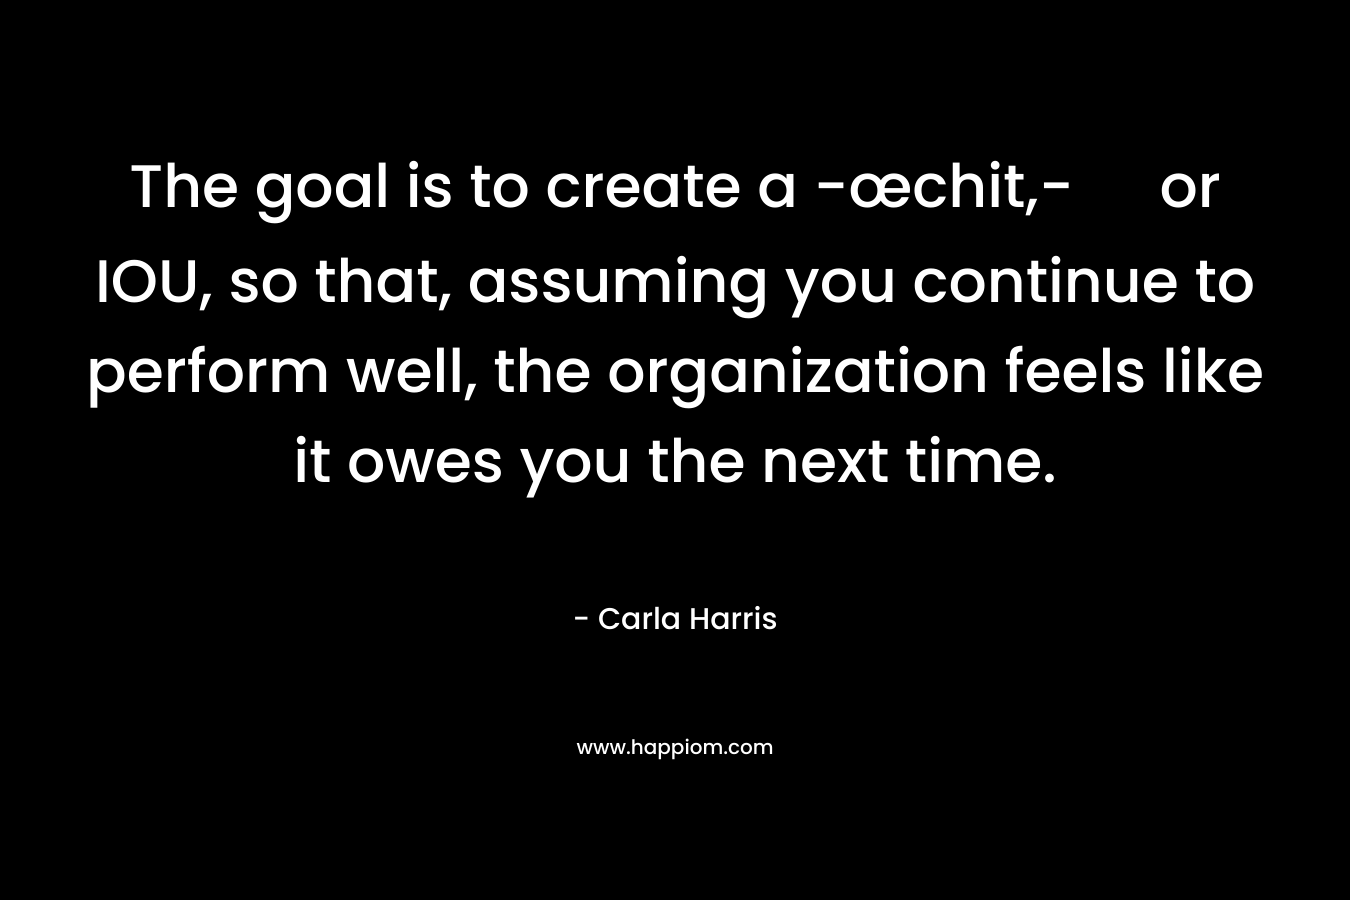 The goal is to create a -œchit,- or IOU, so that, assuming you continue to perform well, the organization feels like it owes you the next time. – Carla Harris